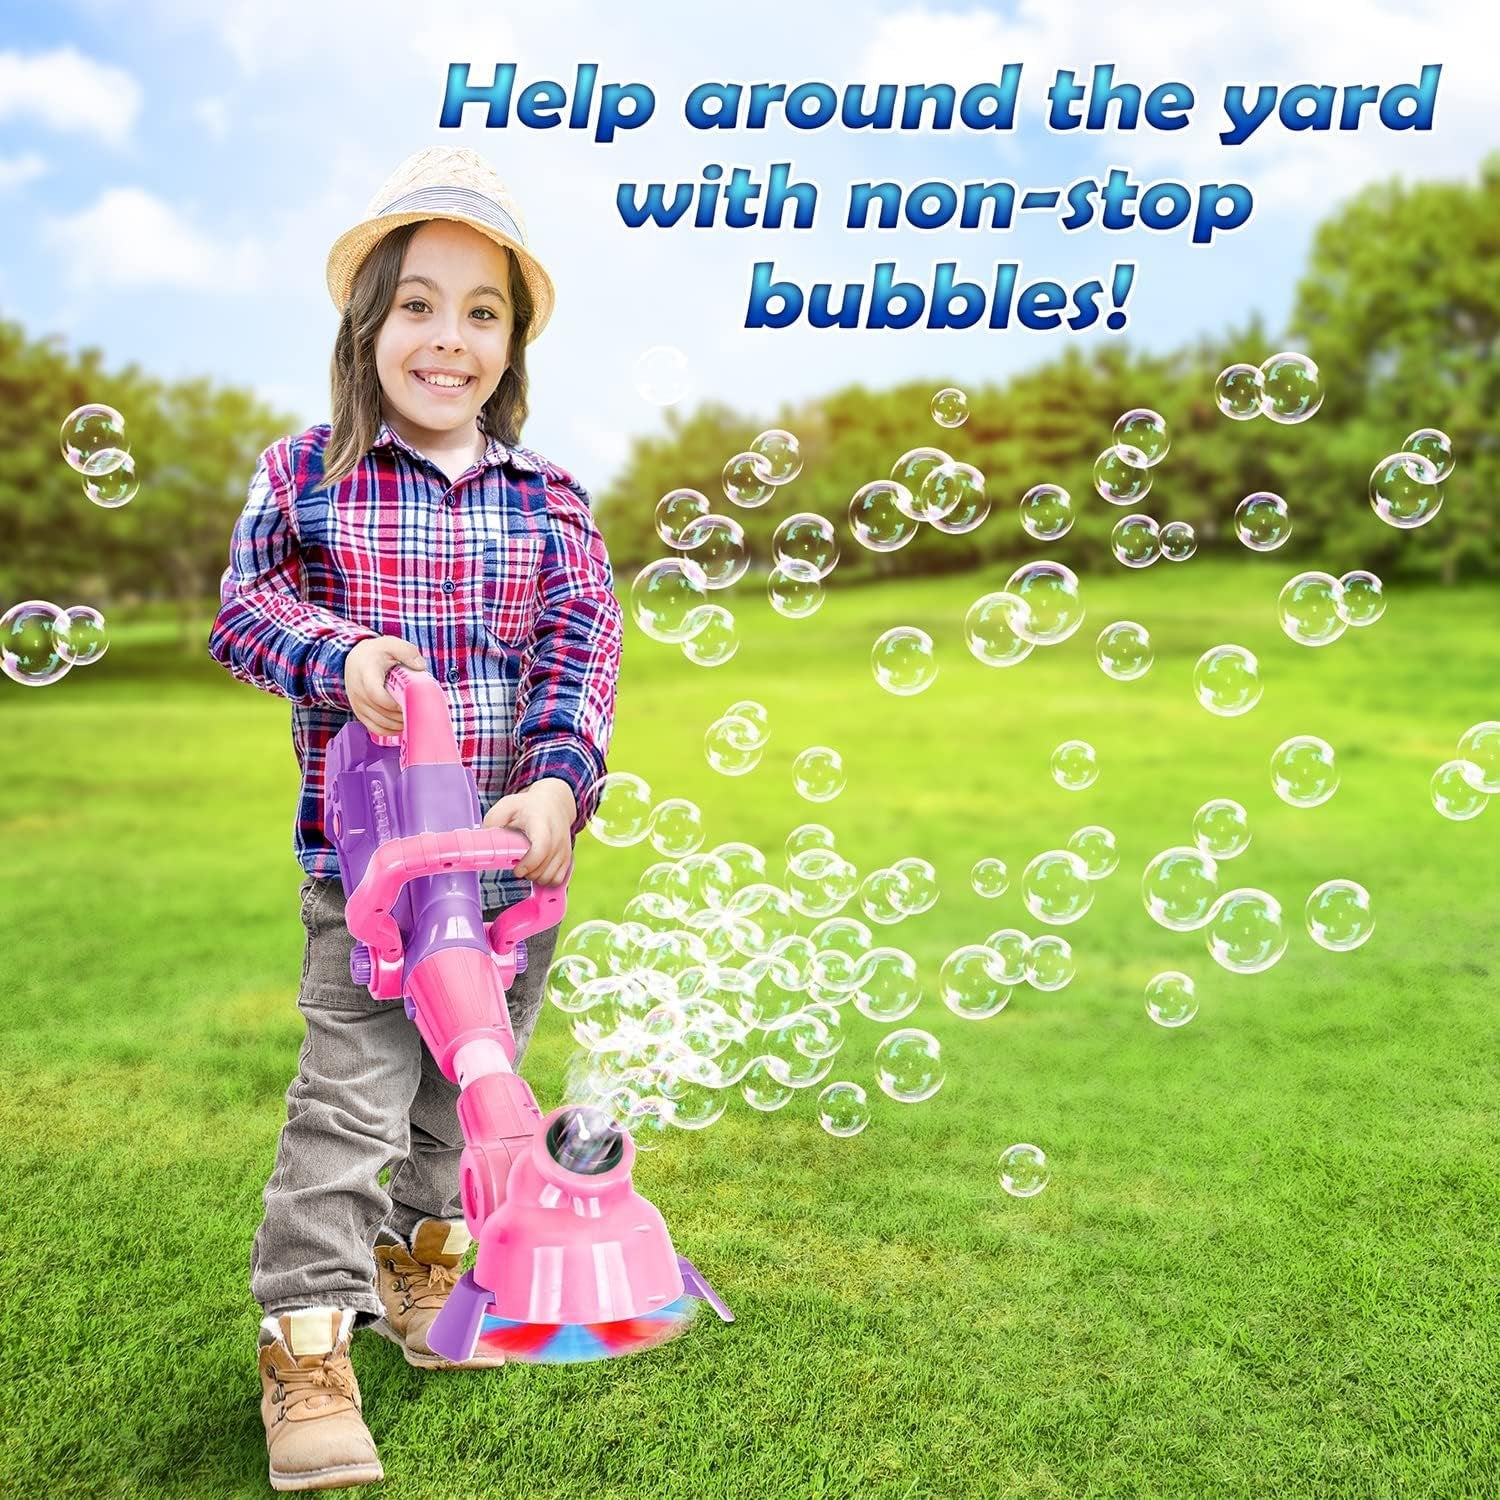 Bubble String Trimmer, Kids Bubble Blower Machine with Bubble Solution Included, Grass Trimmer Toy with Lights & Sounds, Fun Summer Outdoor Toy for Toddlers, Pink&Purple